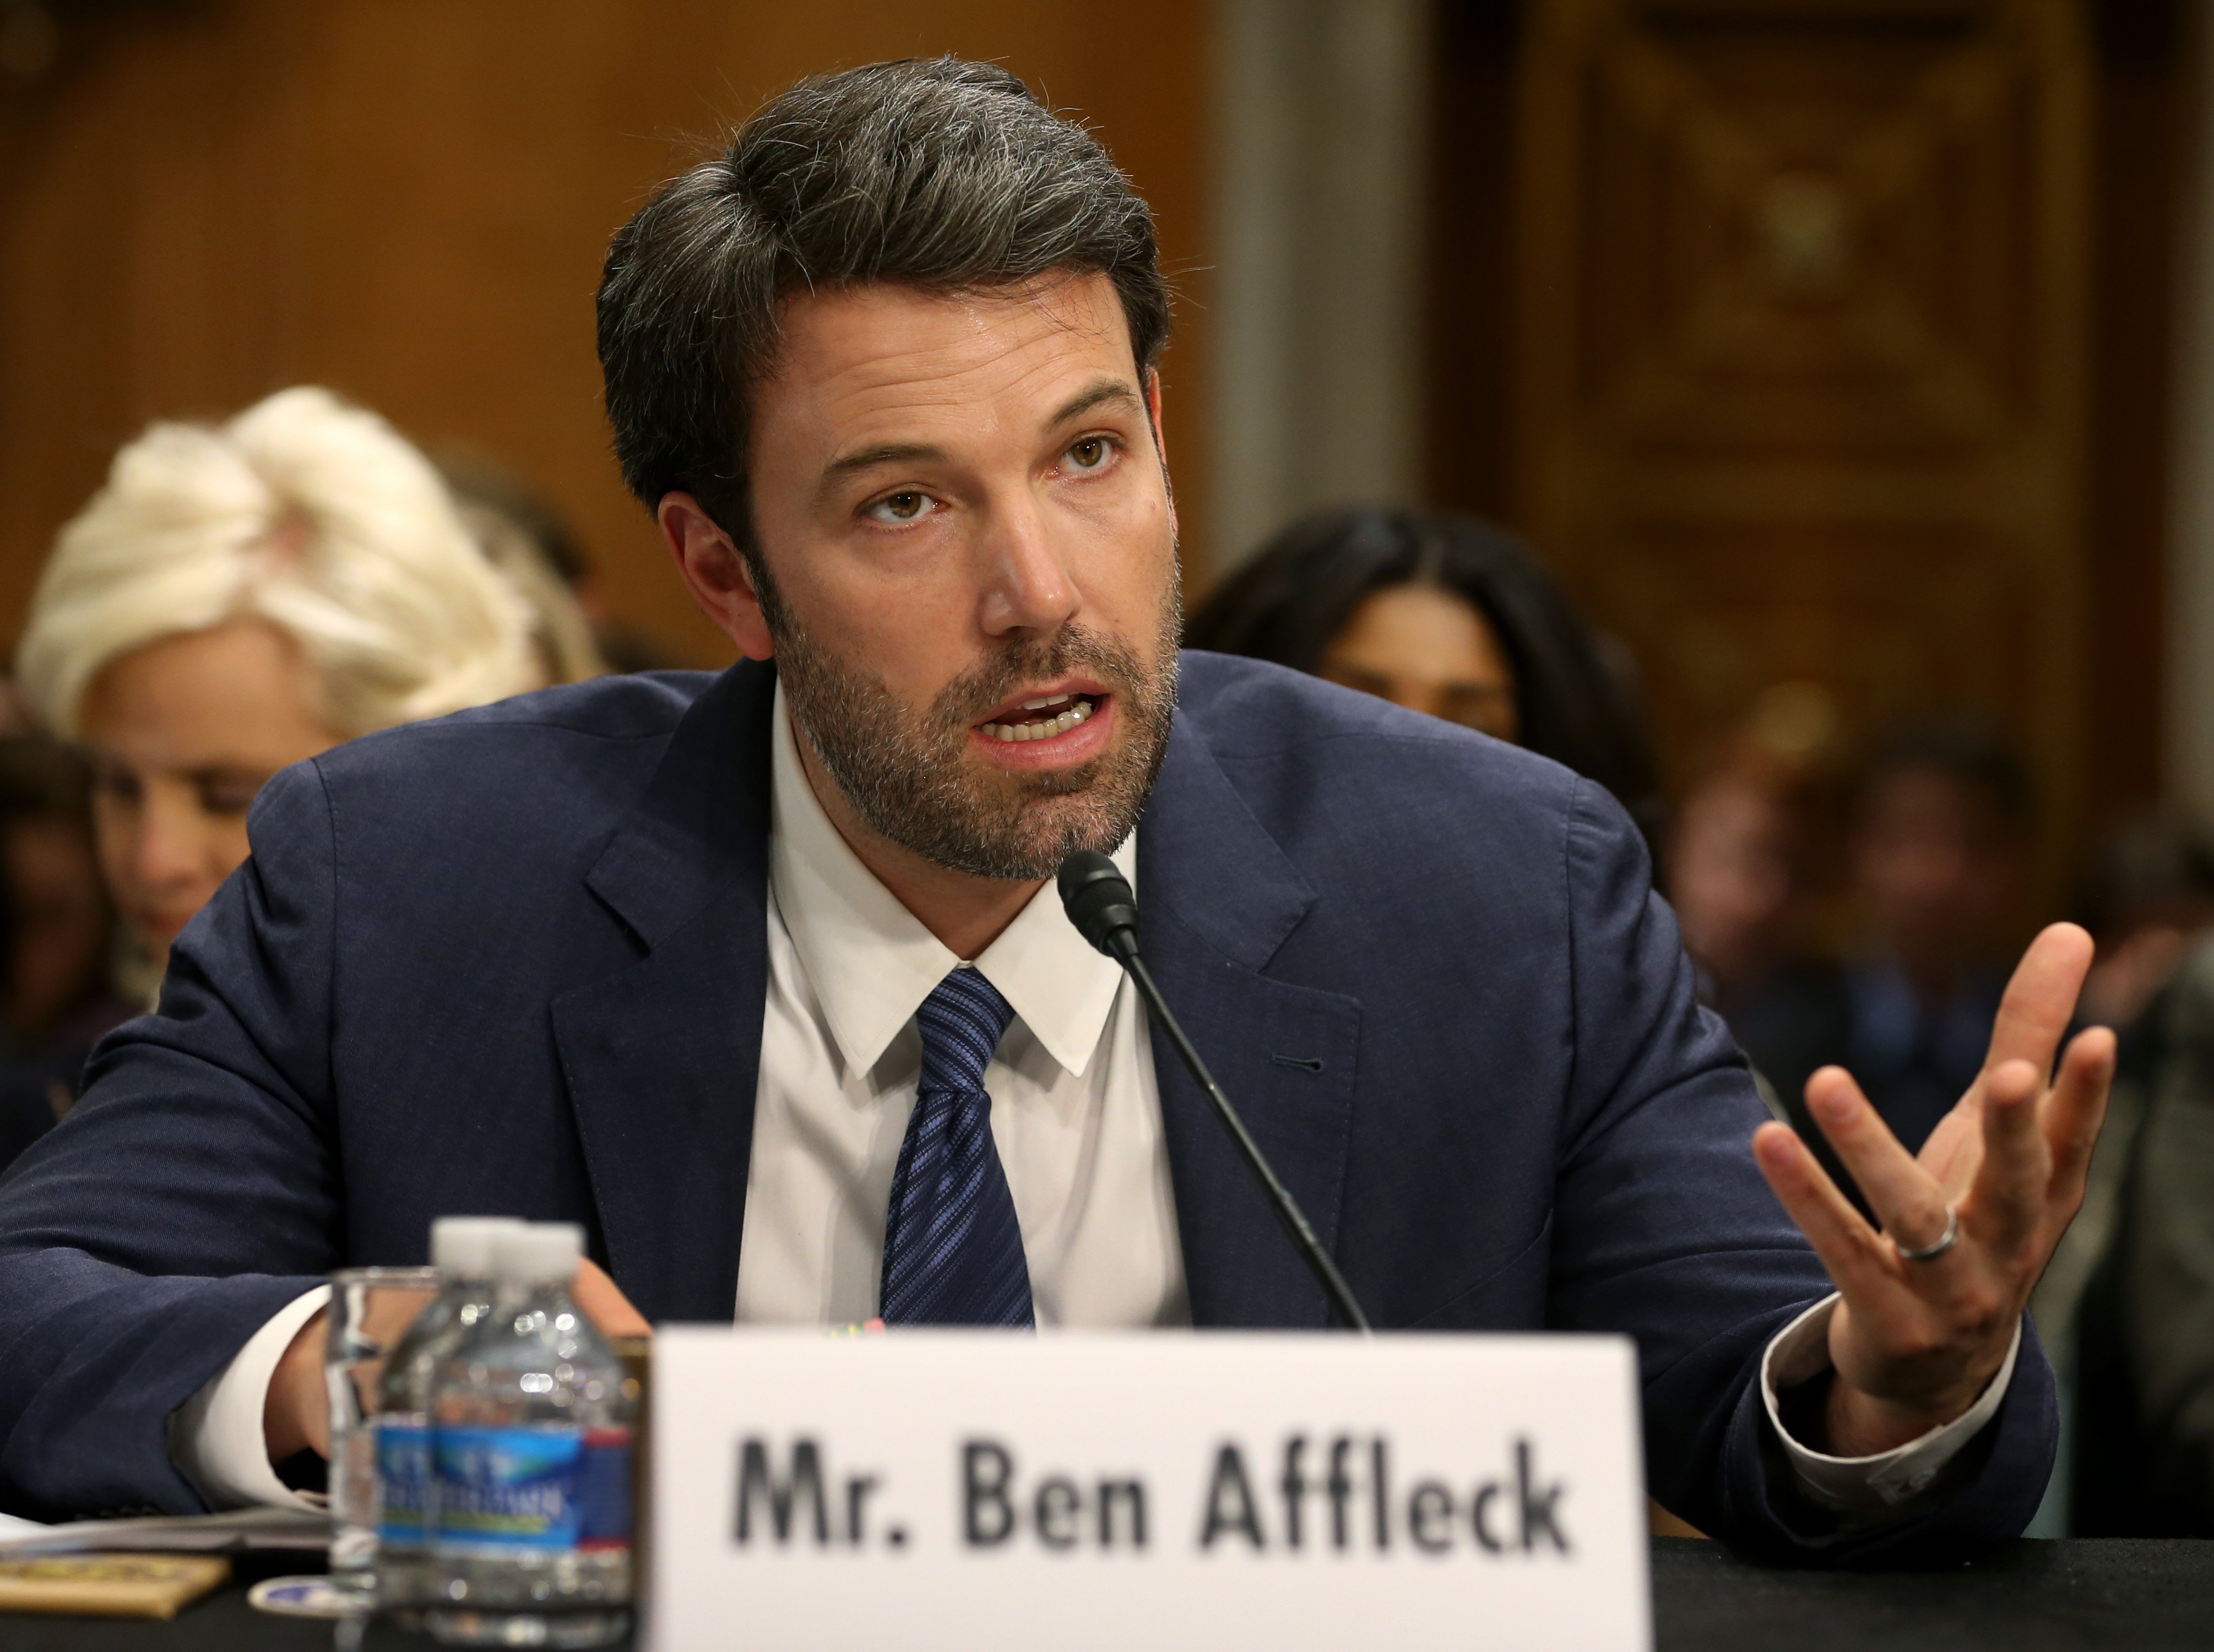 Ben Affleck during his 2014 testimony in the Senate Foreign Relations Committee hearing in Washington D.C. | Photo: Getty Images